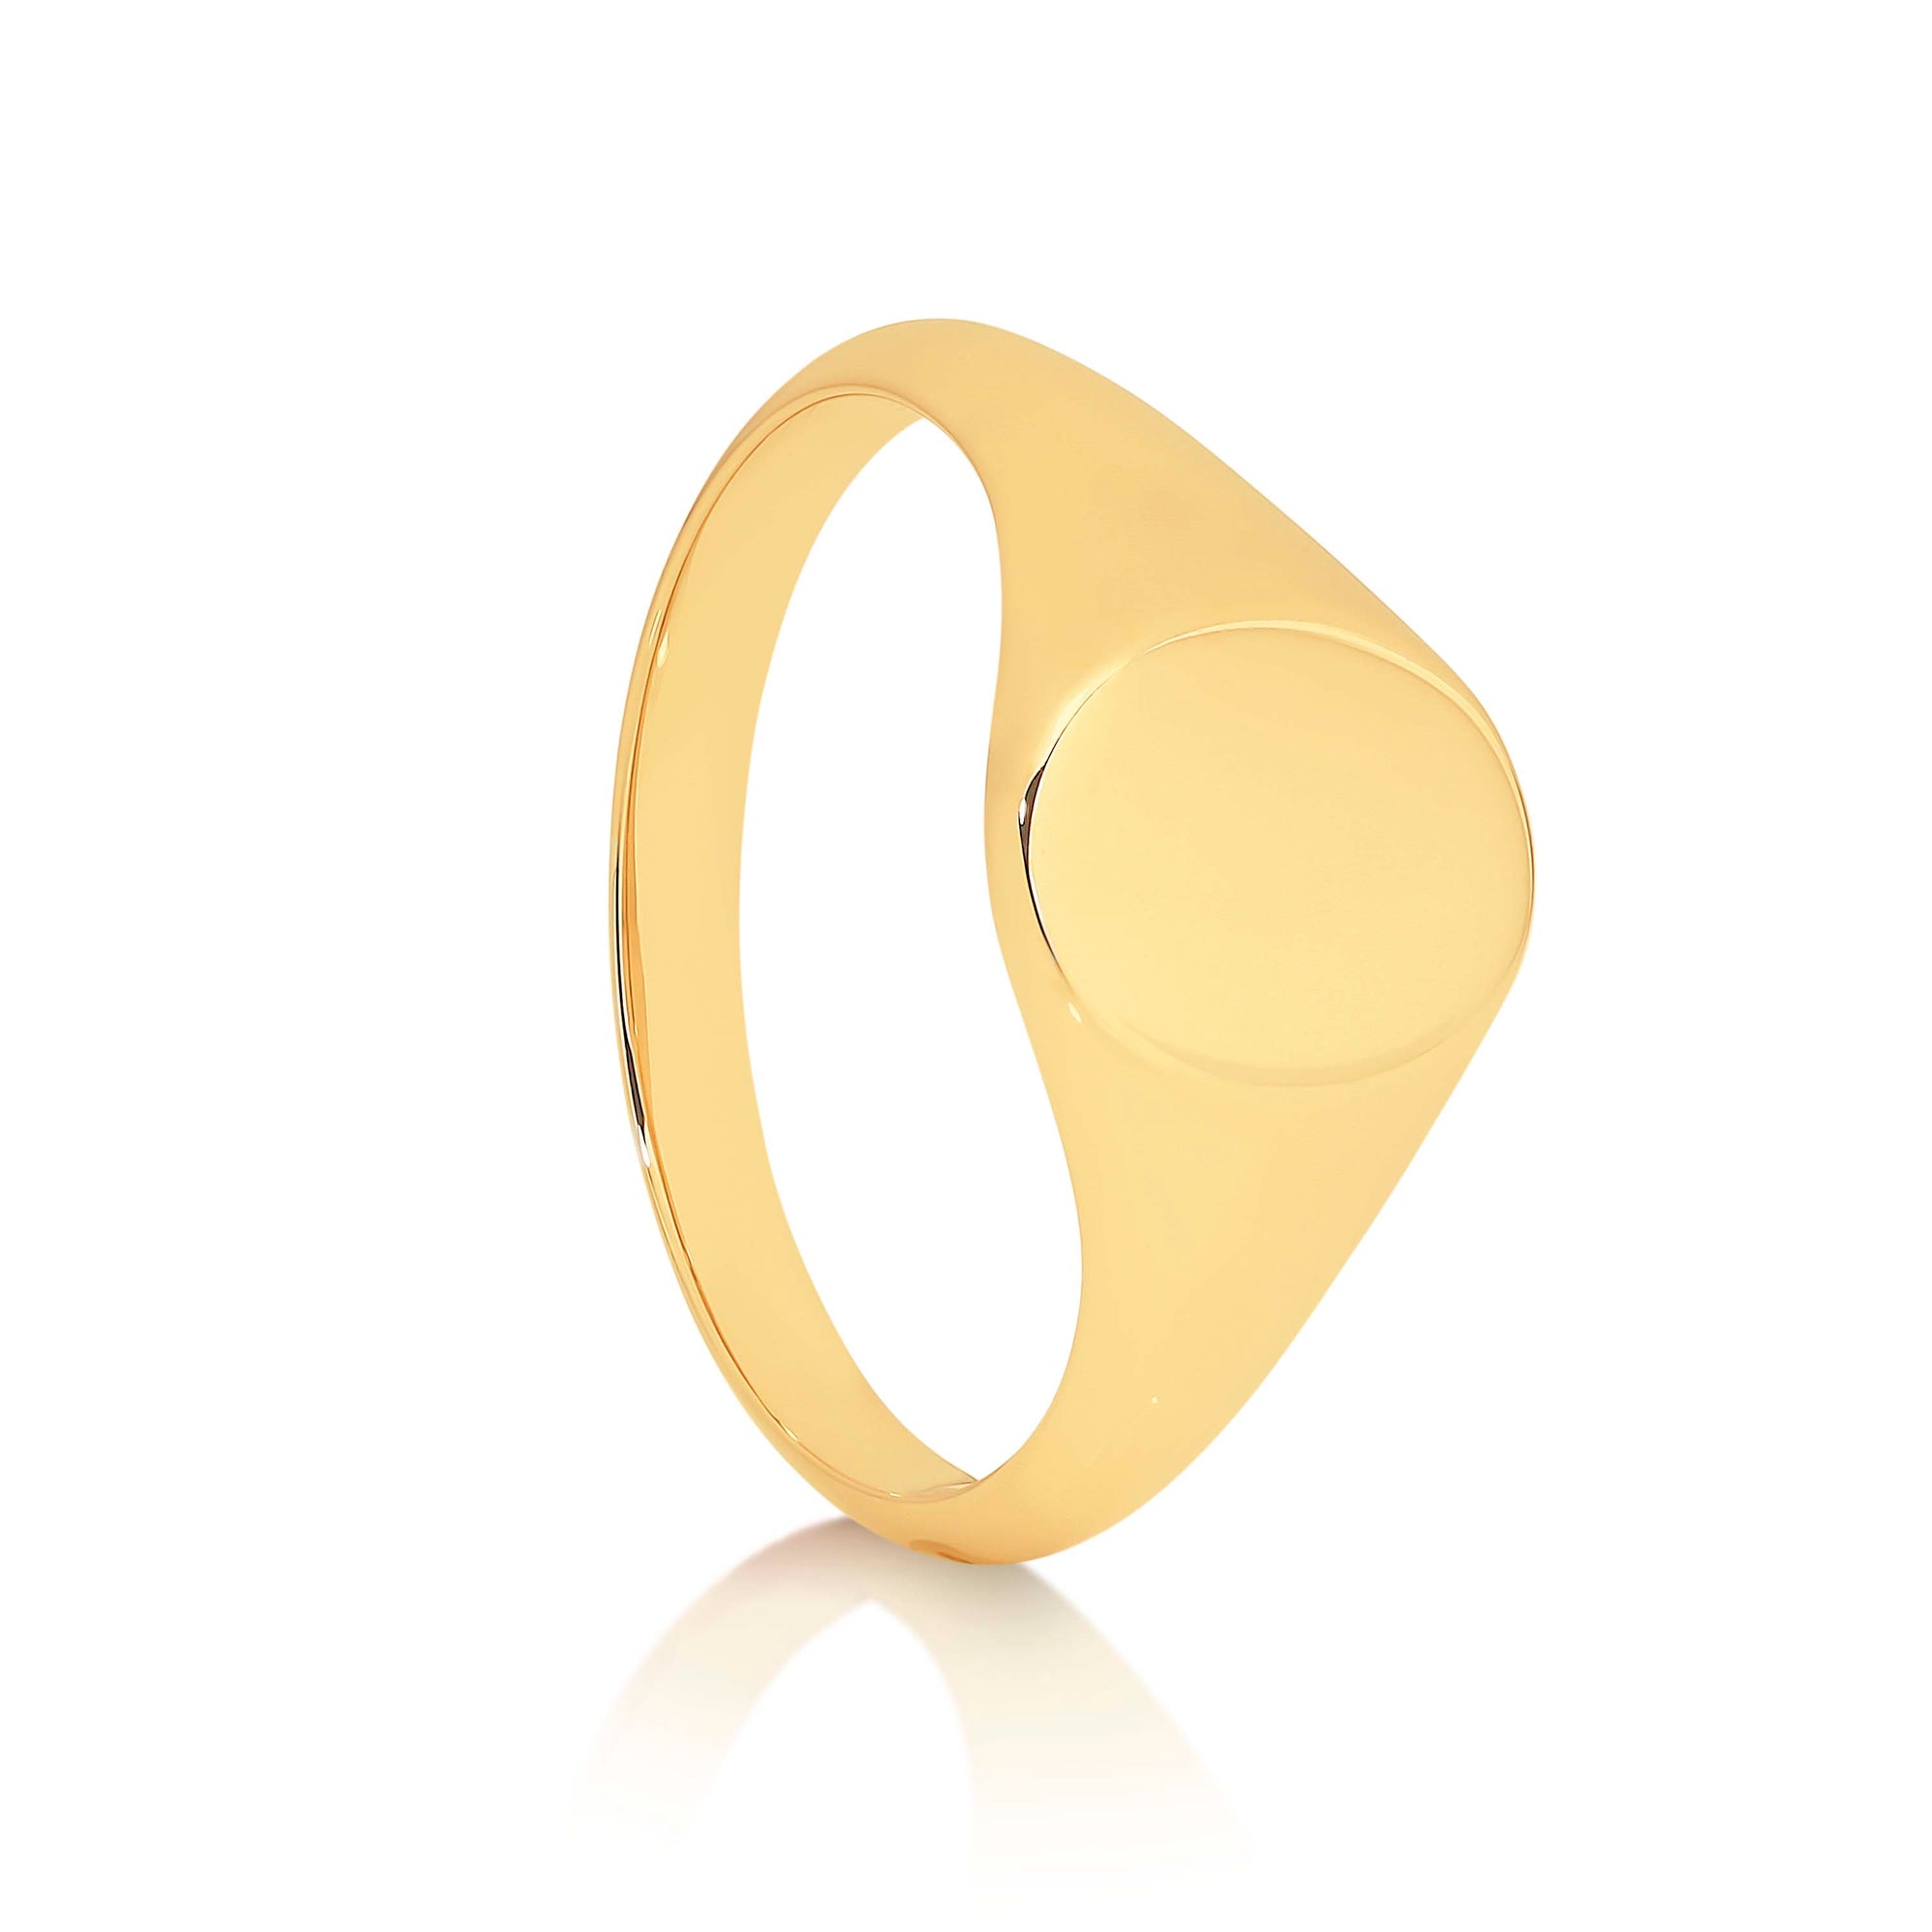 Oval 9 Carat Yellow Gold Signet Ring